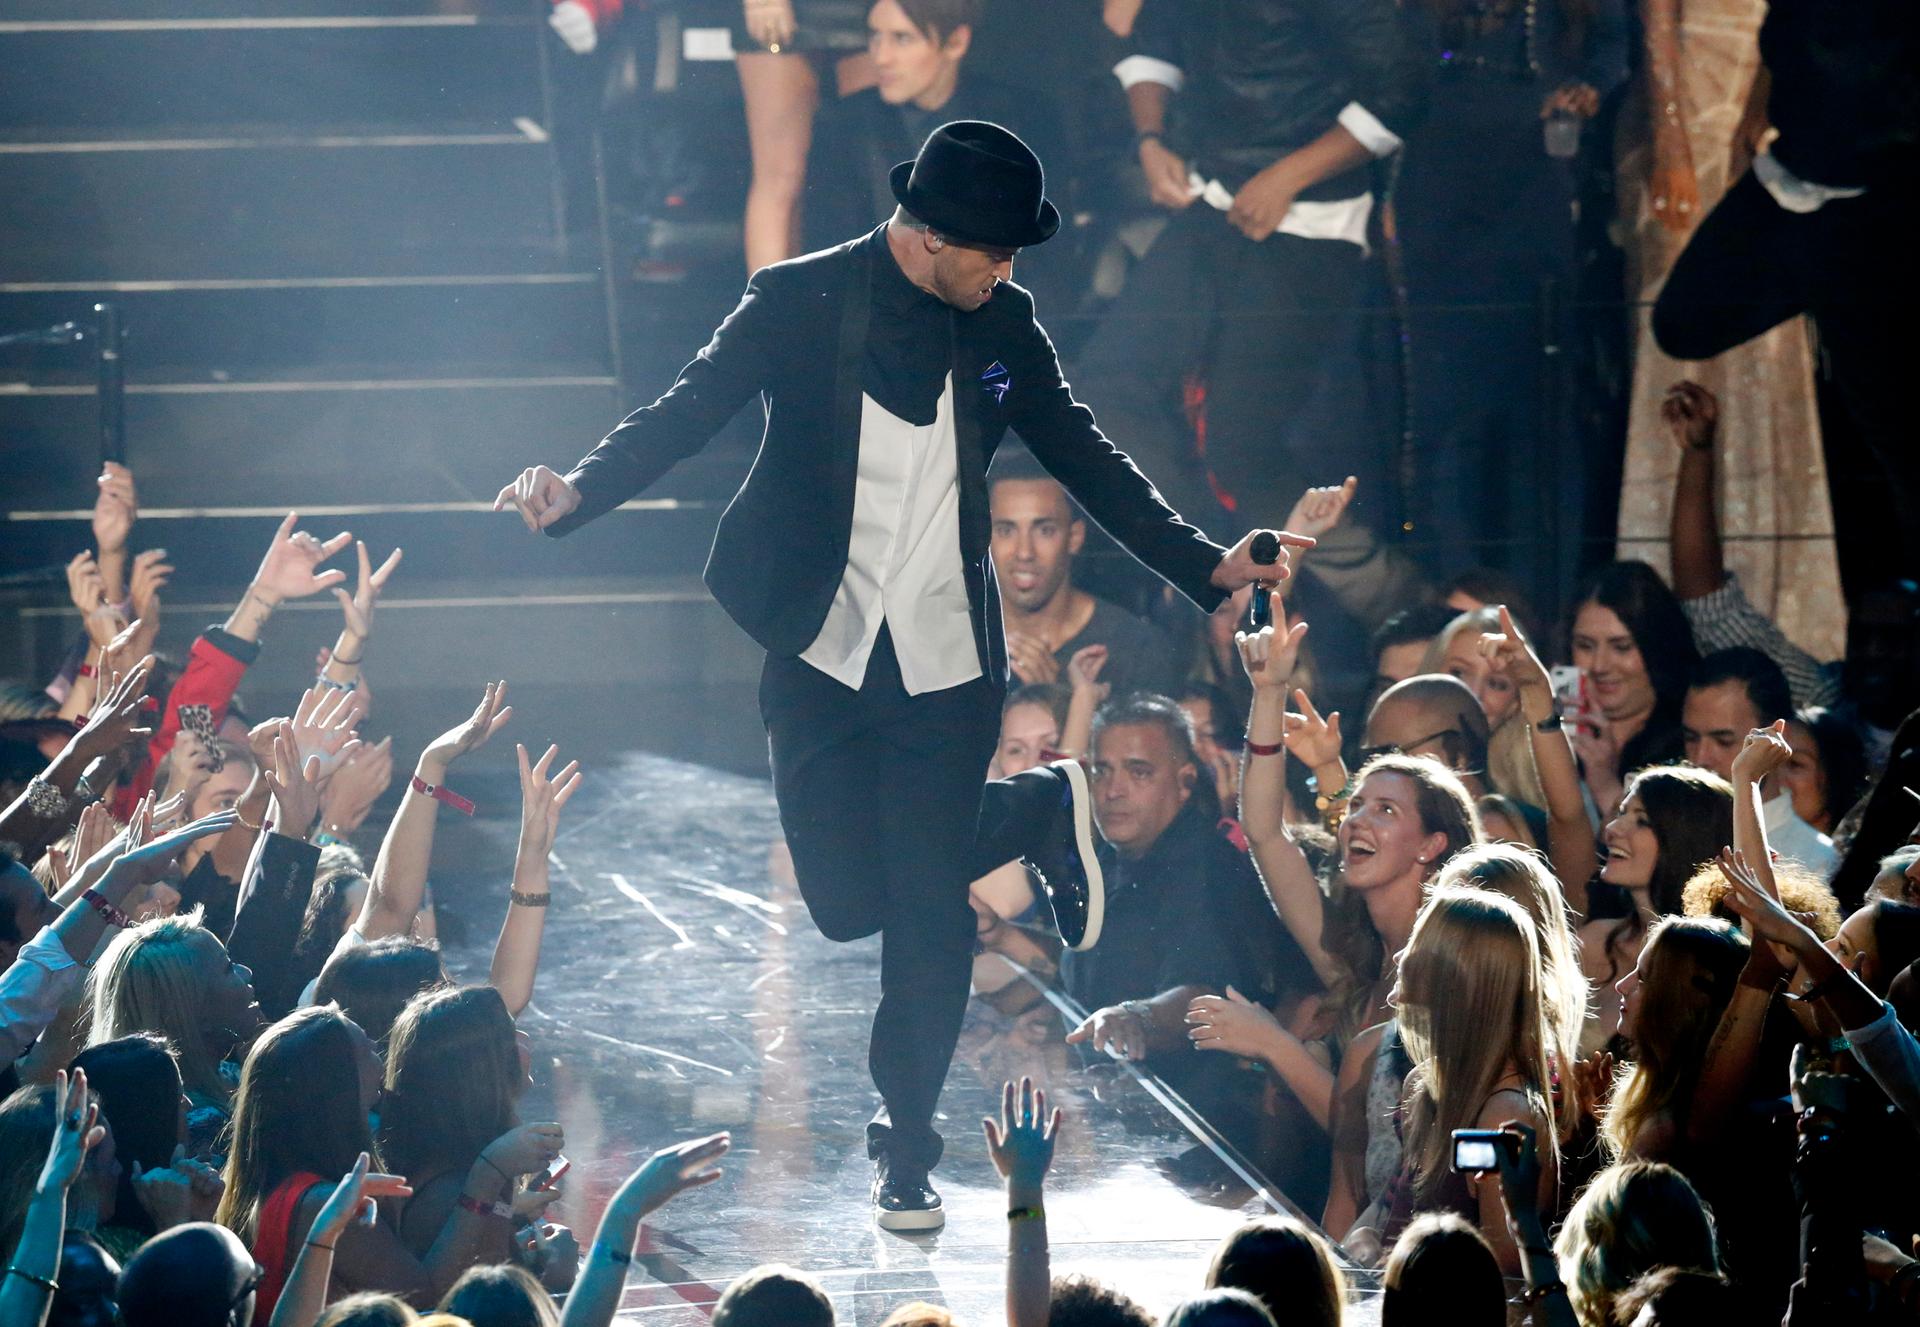 Justin Timberlake performs "Cry Me A River" during the 2013 MTV Video Music Awards in New York